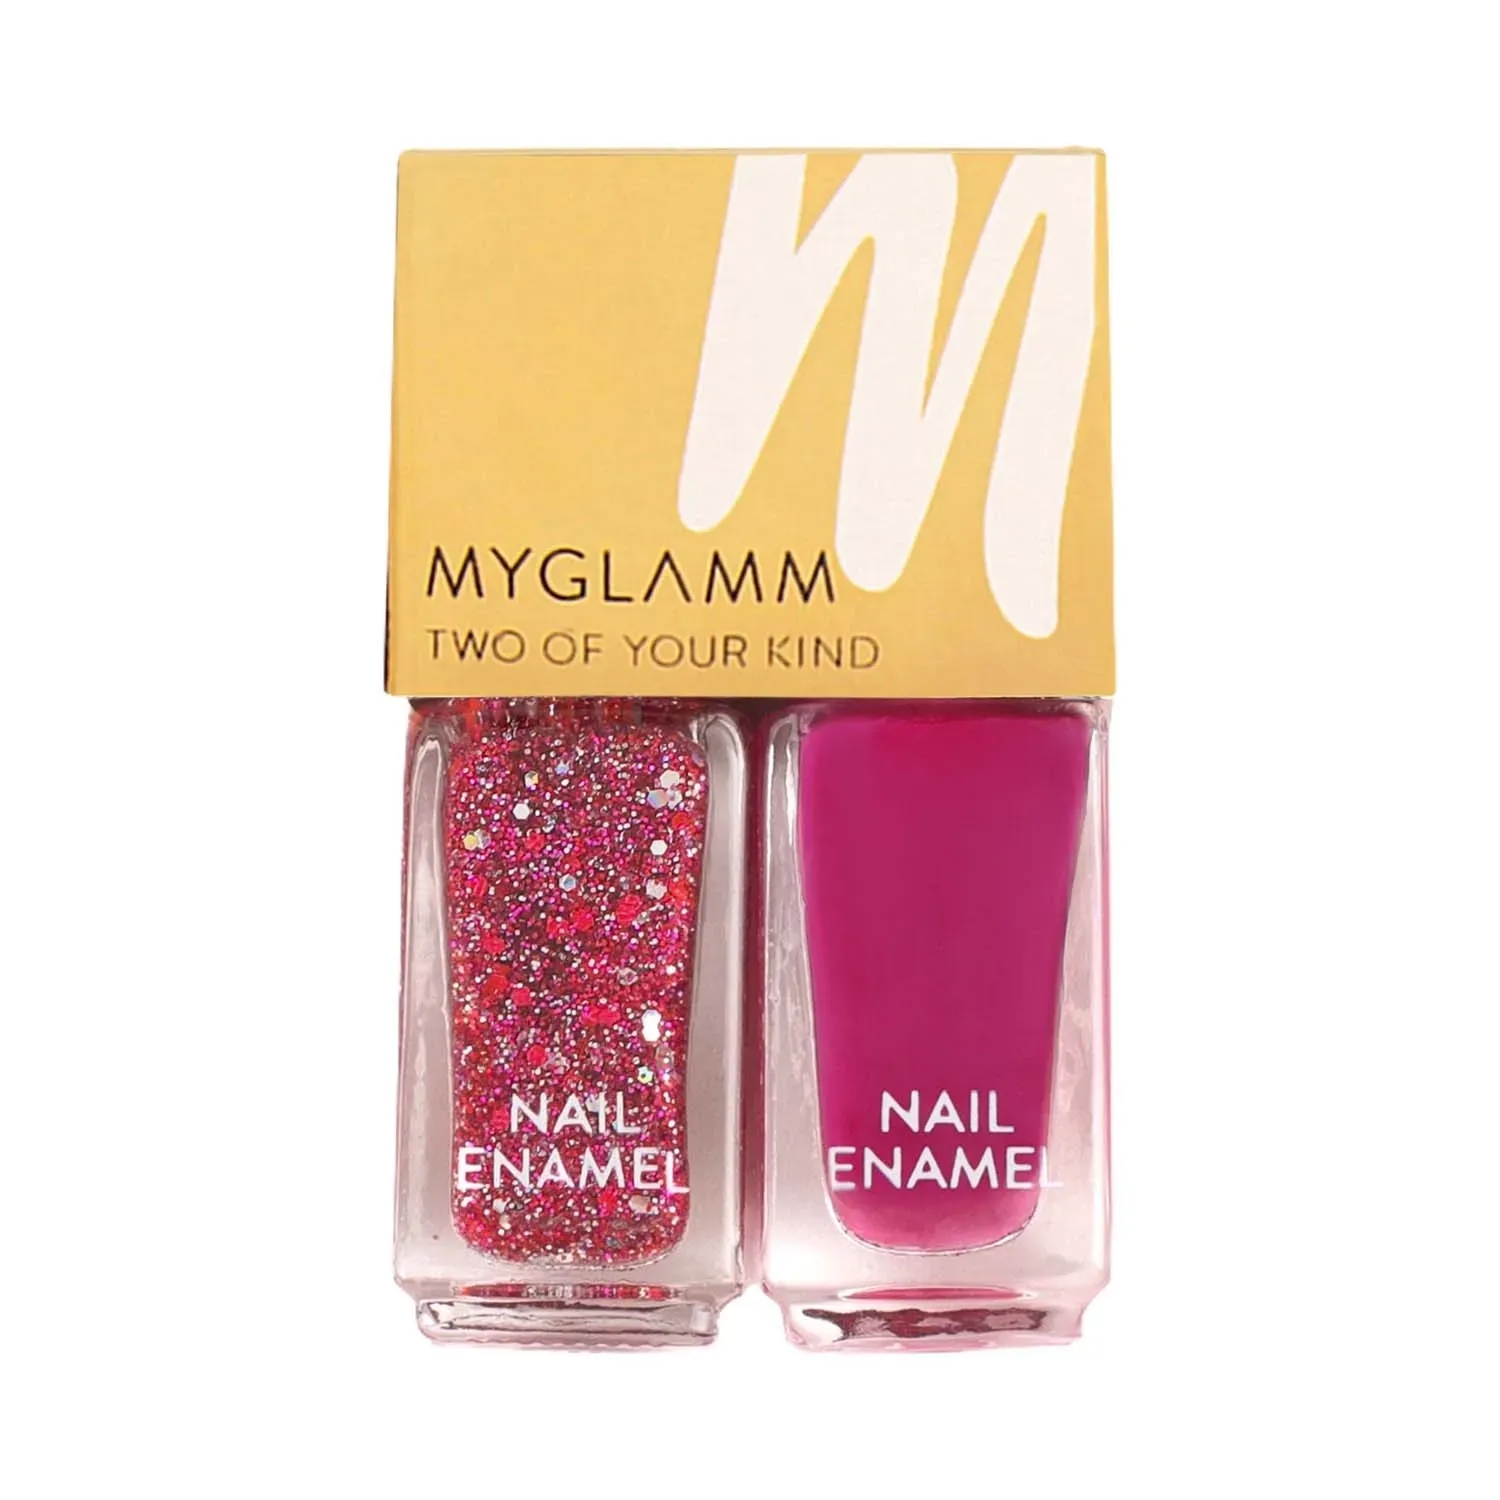 MyGlamm | MyGlamm Two Of Your Kind Nail Enamel Duo Glitter Collection - Bring The Bling (10ml)